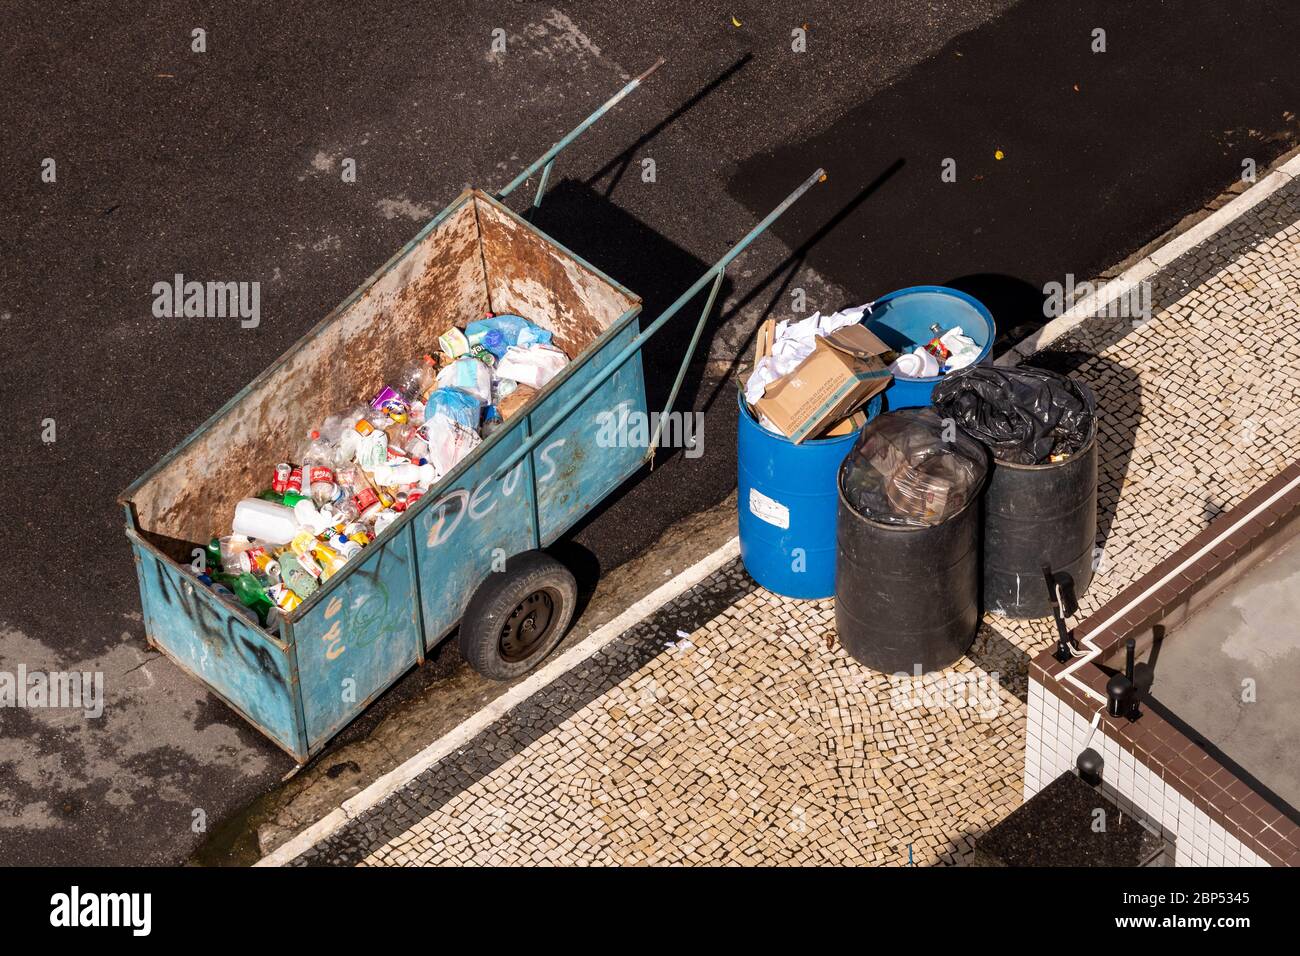 wagon of a waste picker with the word god graffitied Stock Photo